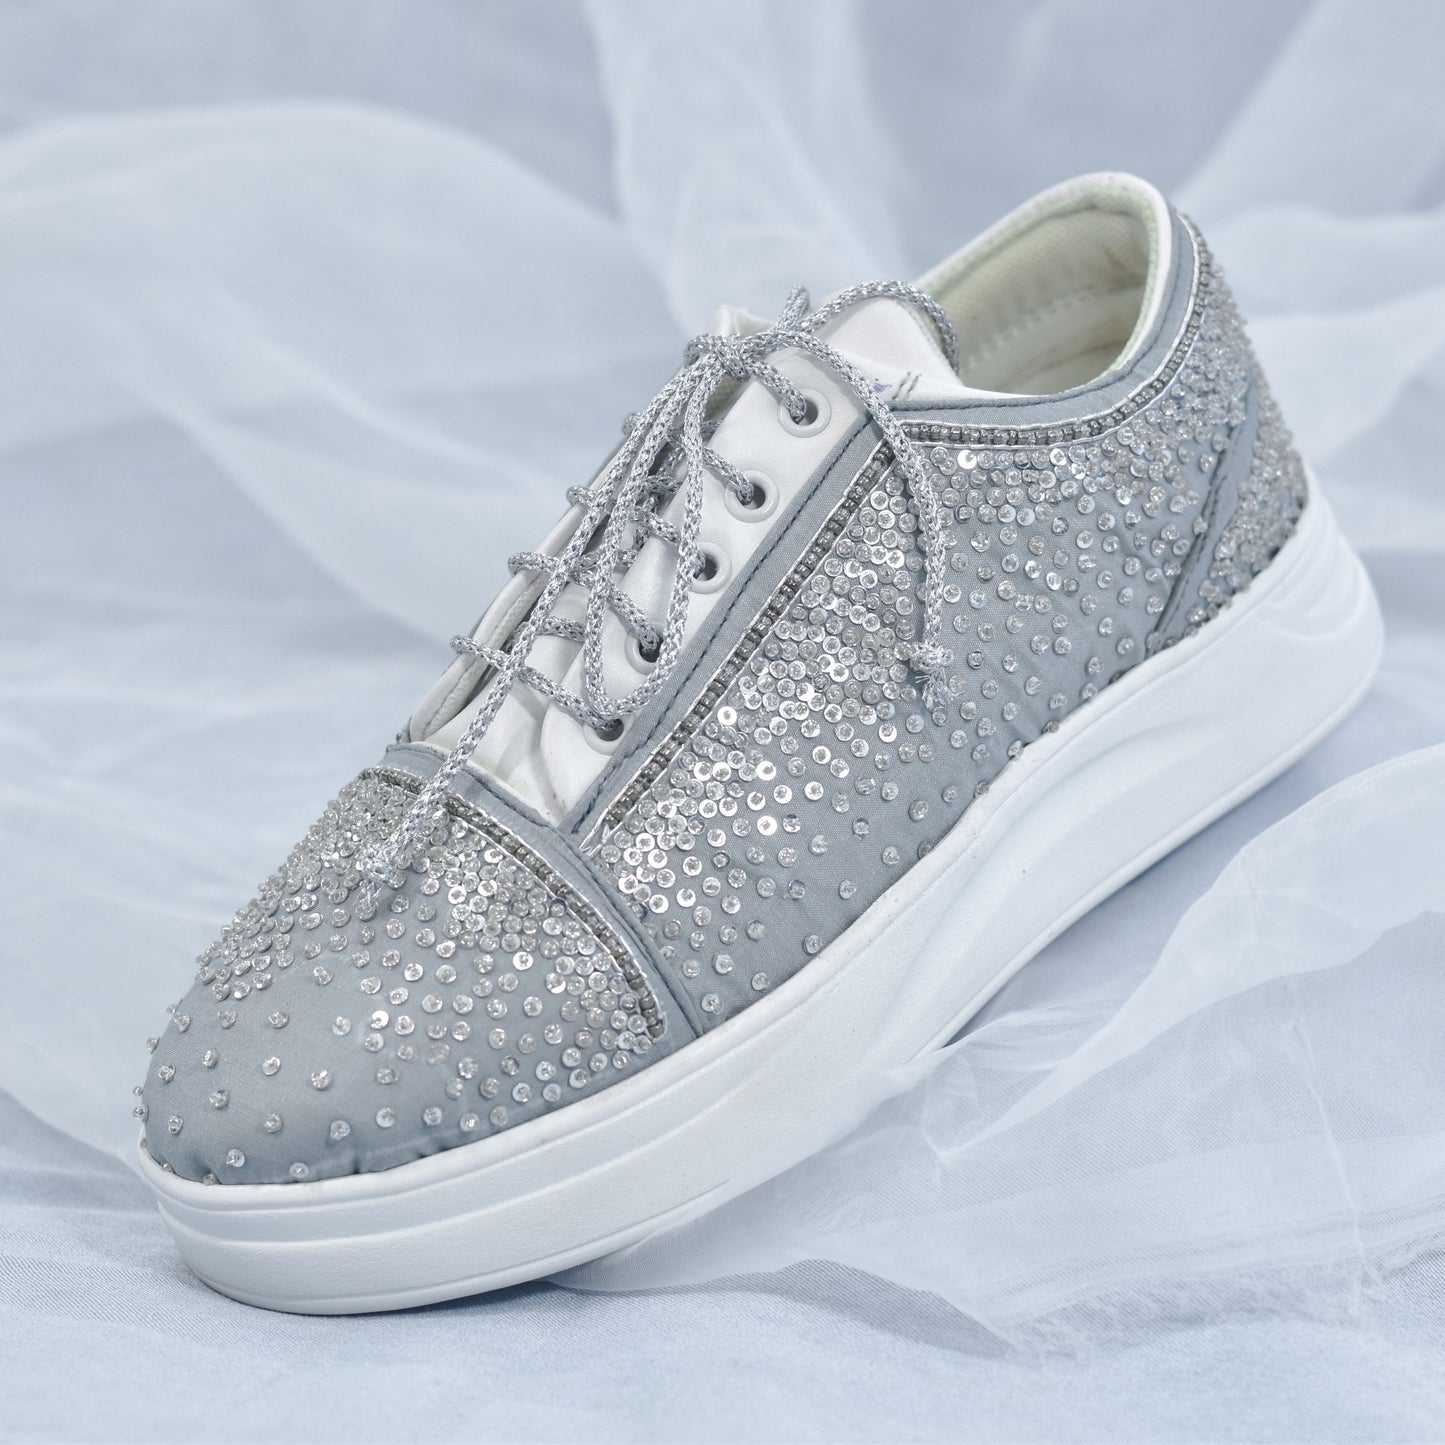 Designer bridal sneakers with hand embroidery